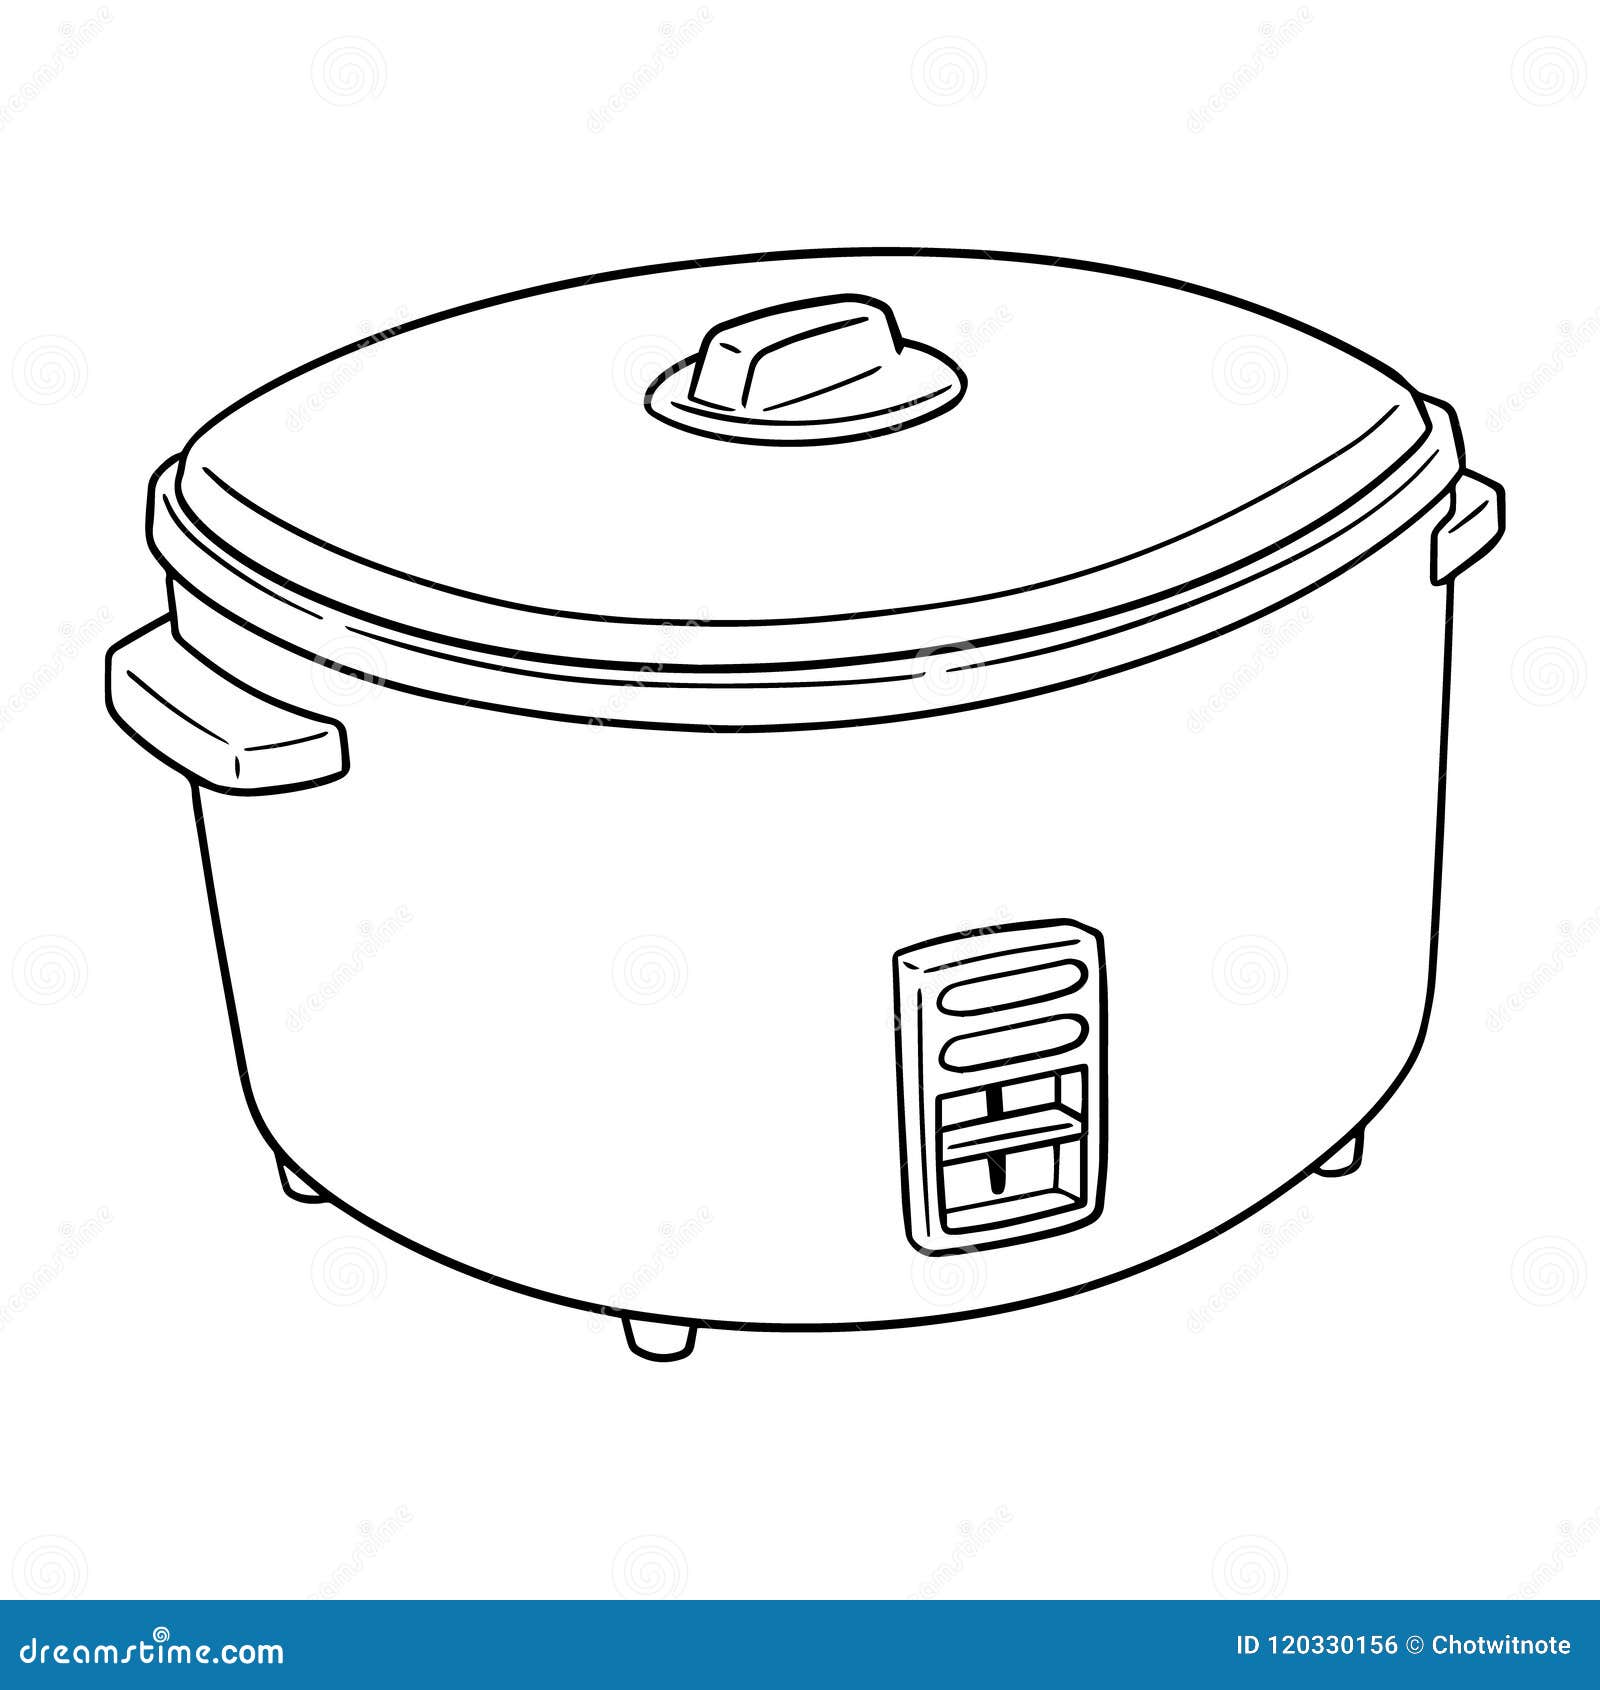 Vector of rice cooker stock vector. Illustration of hand - 120330156